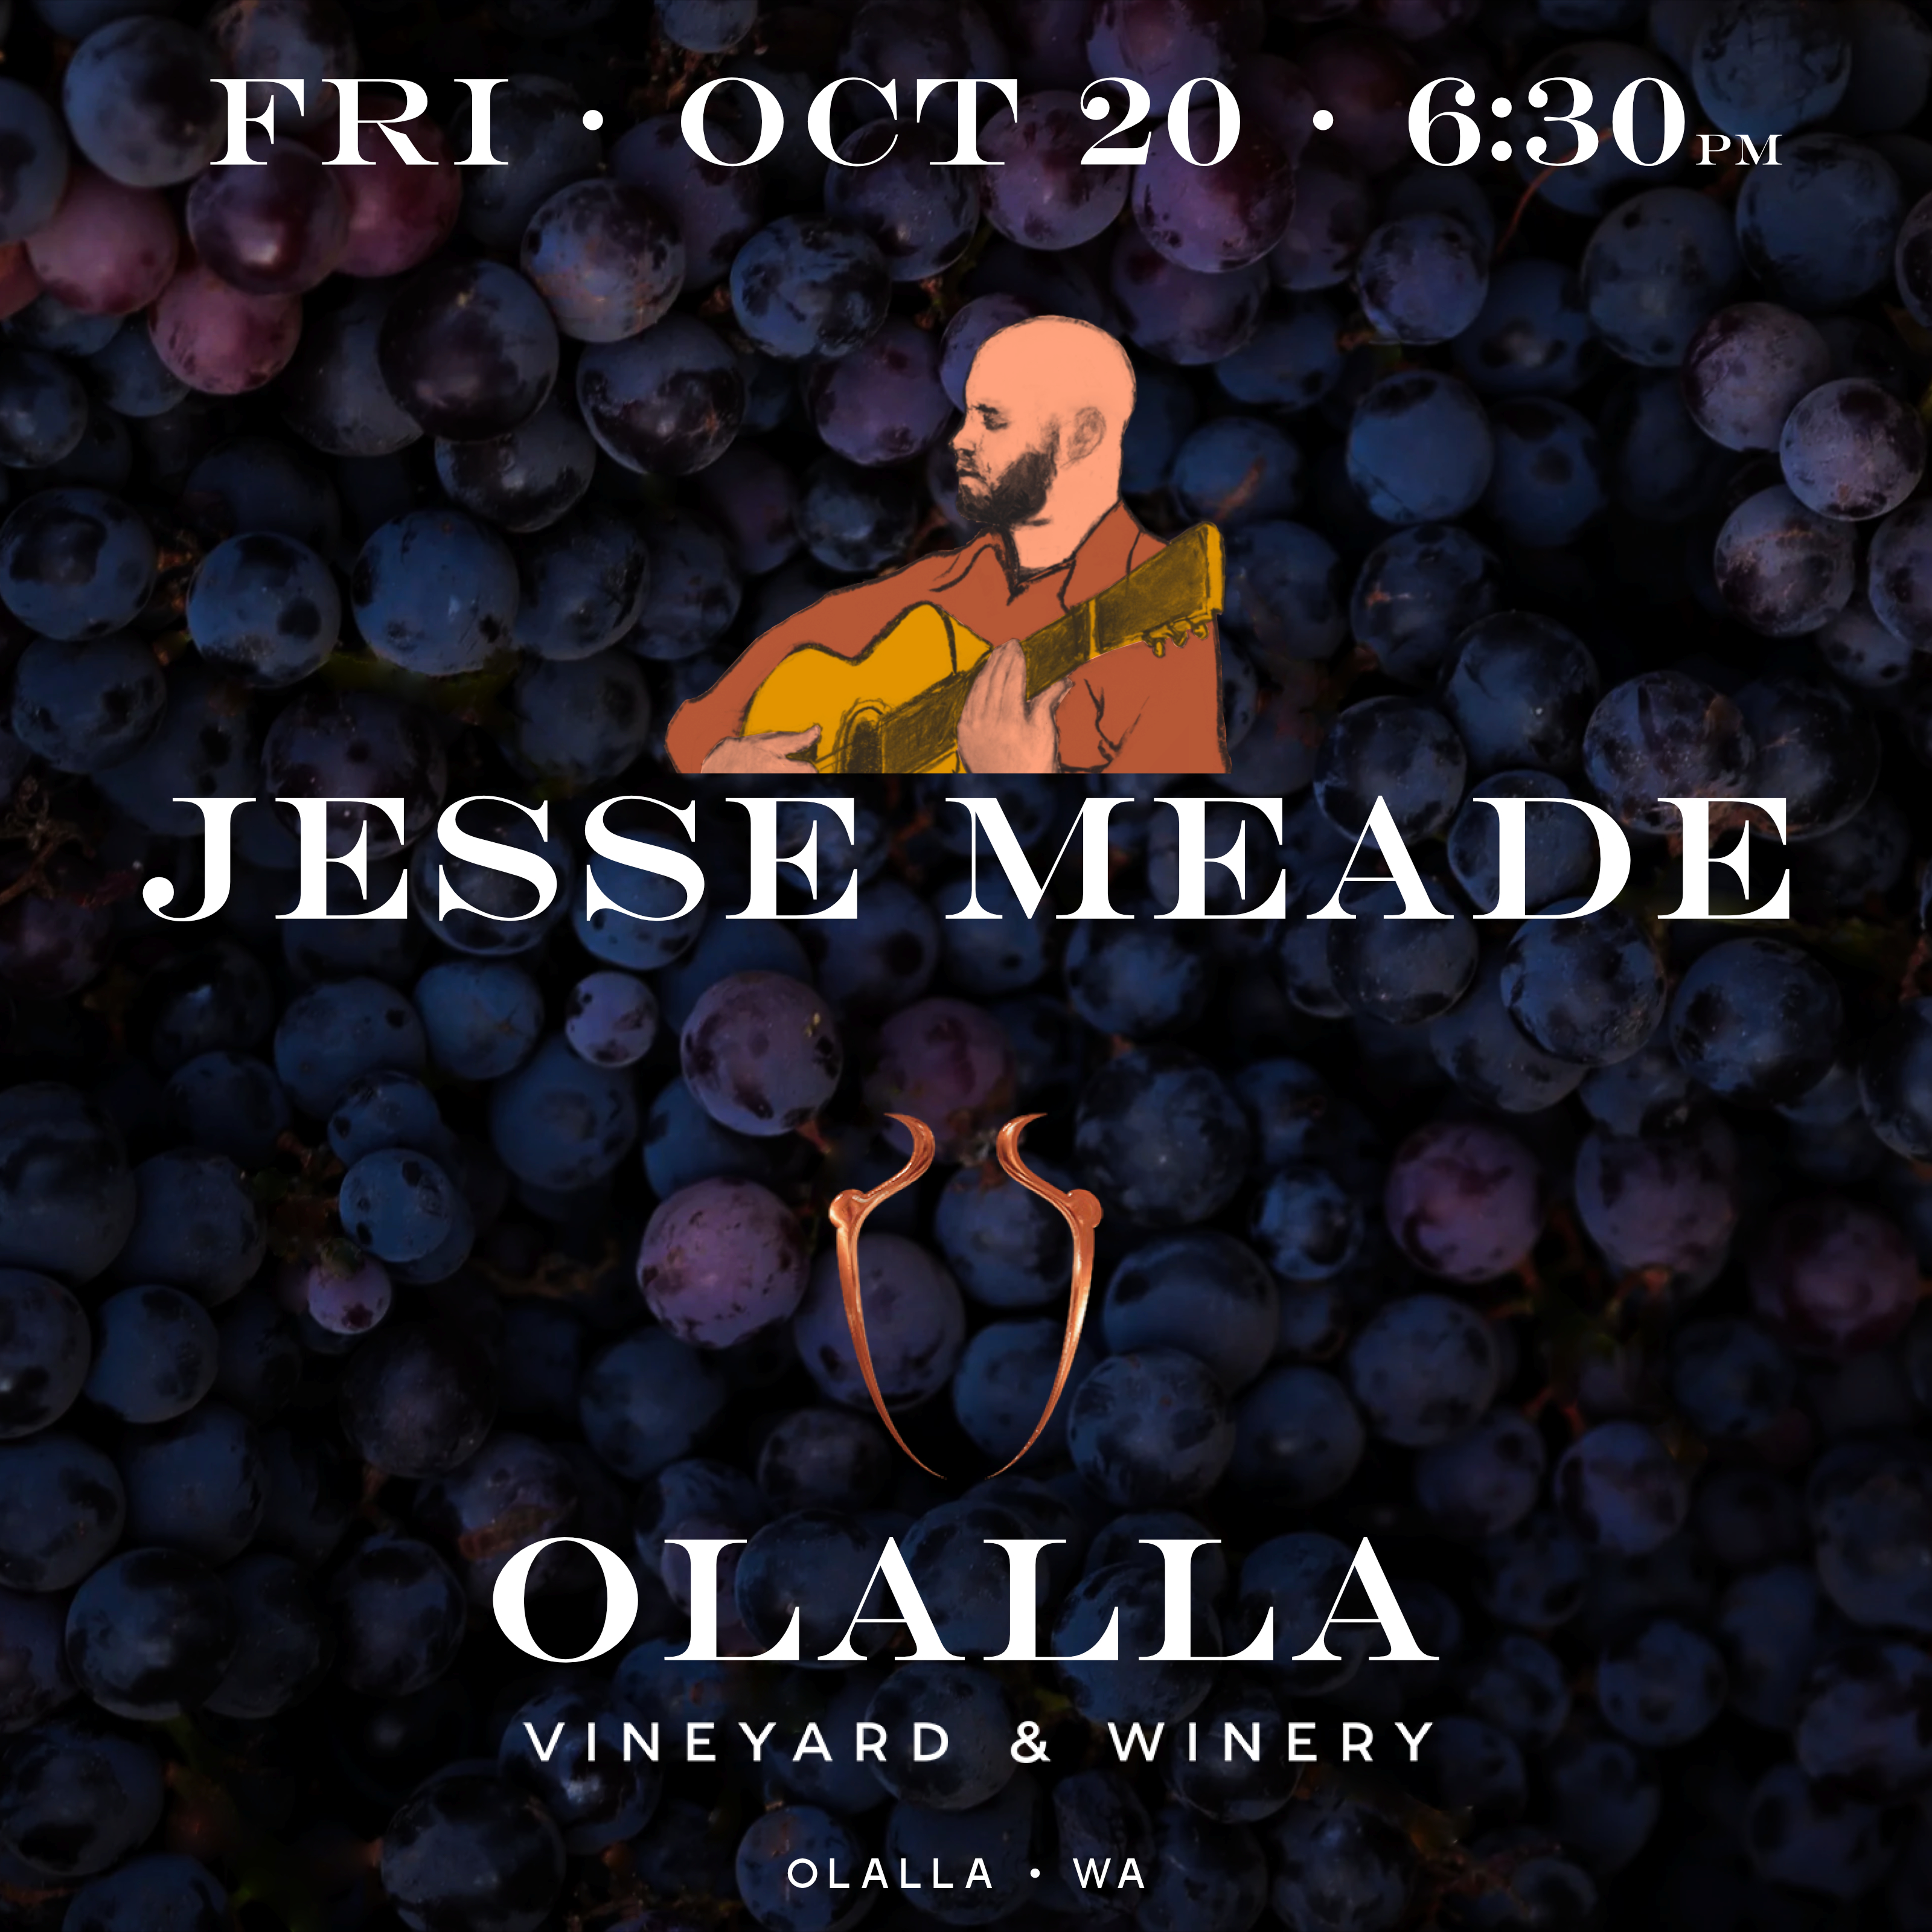 Product Image for 10-20-23 Jesse Meade in the Loft on Friday, October 20th from 6:30-8:30pm